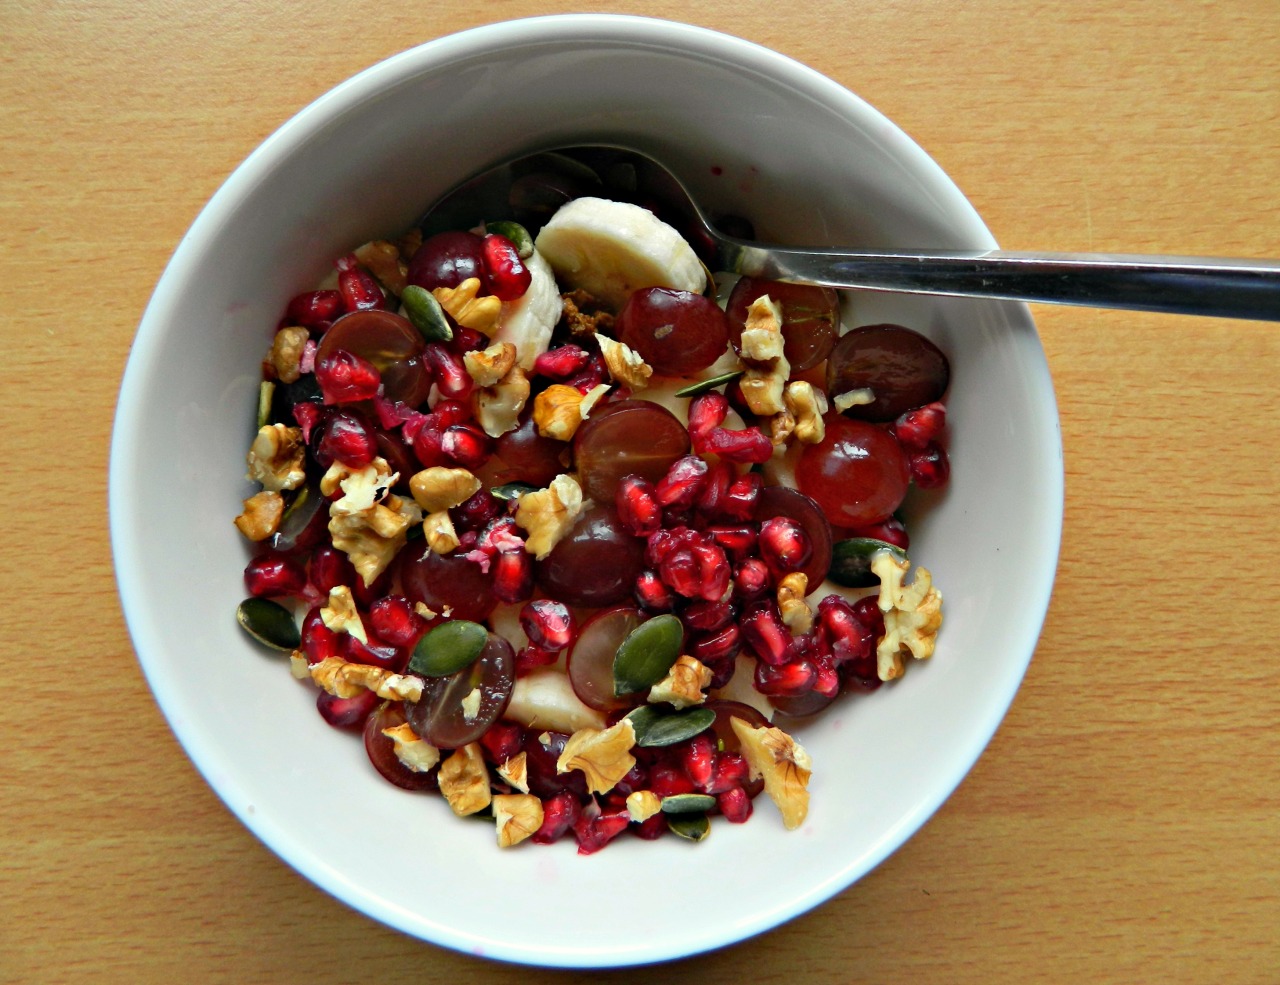 Bran flakes with banana, red grapes, pomegranate, pumpkin seeds and walnuts with hazelnut milk.